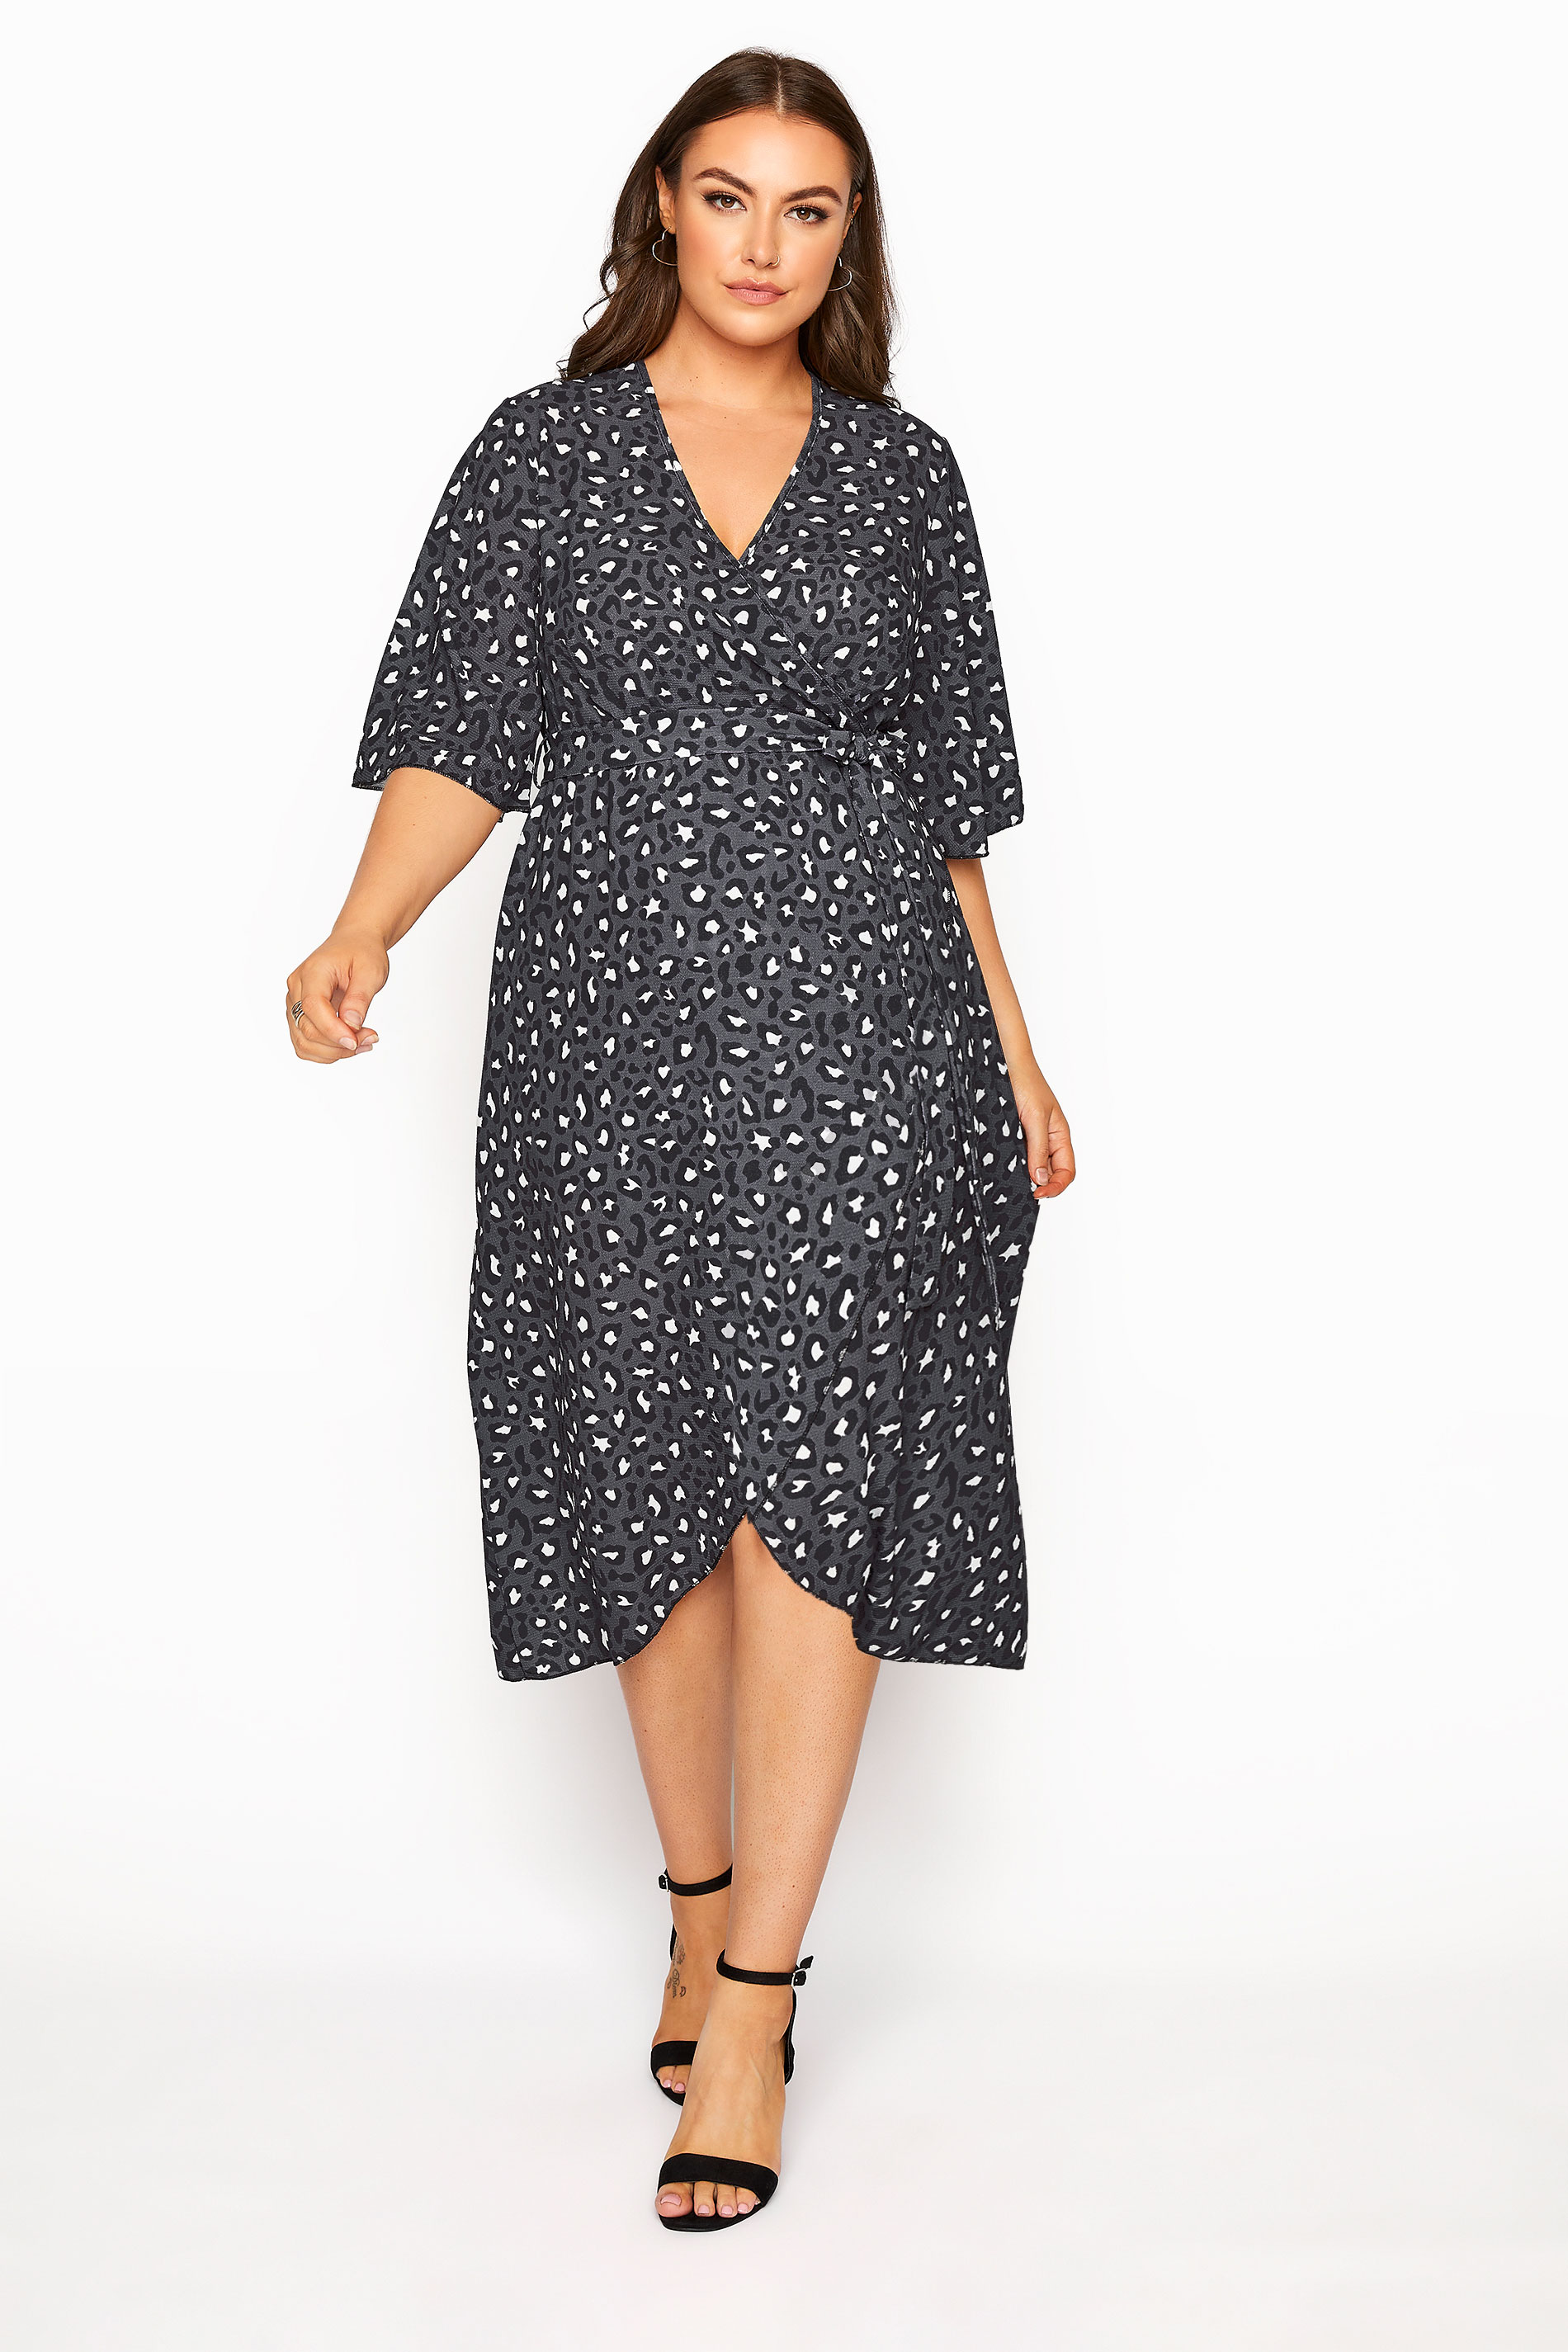 Robes Grande Taille Grande taille  Robes Portefeuilles | YOURS LONDON - Robe Grise Cache-Coeur Léopard - LL78184